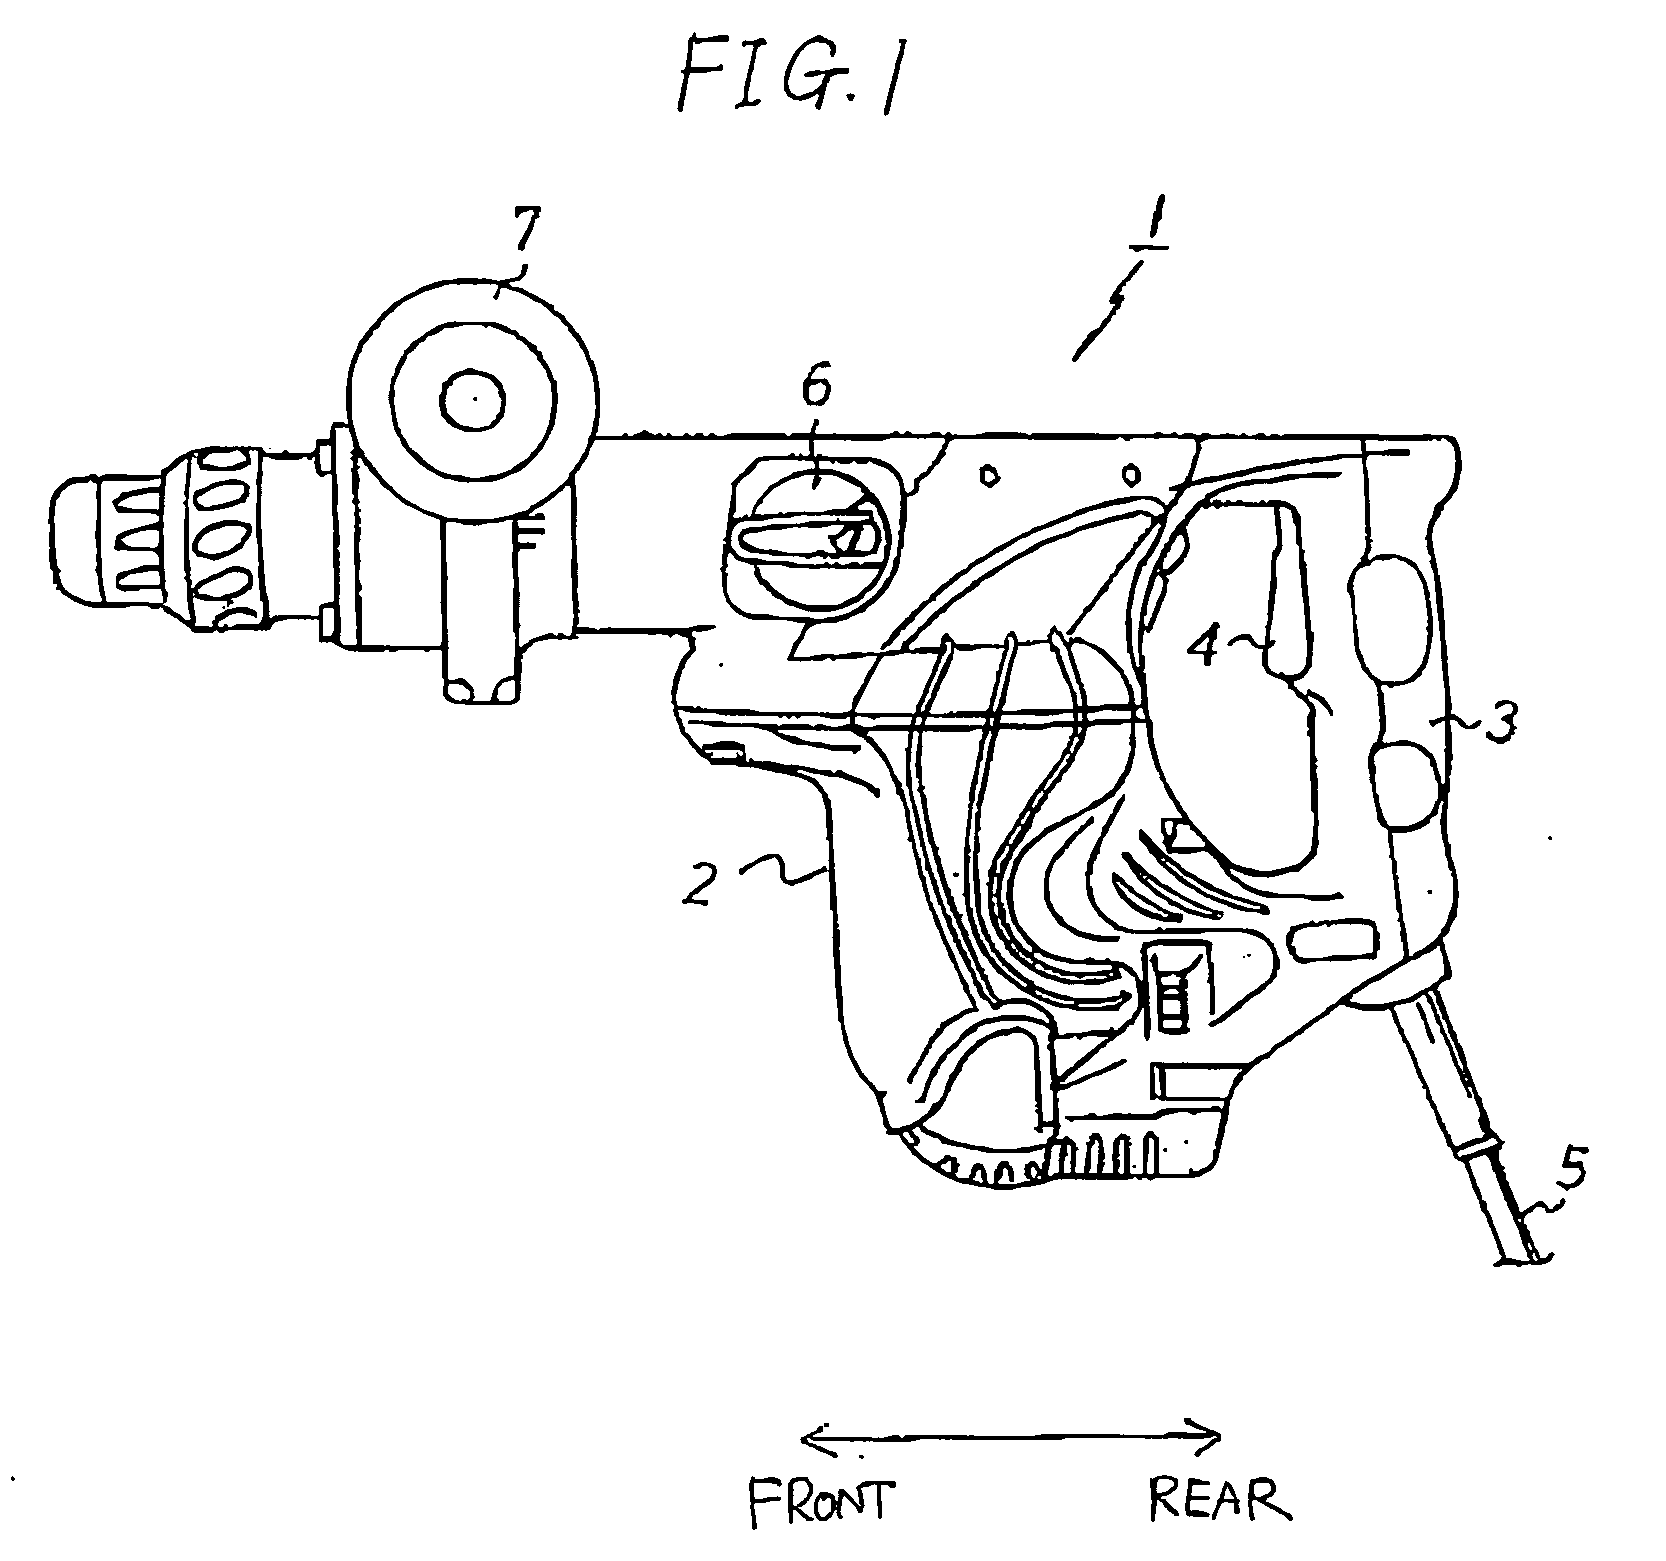 Hammer drill having switching mechanism for switching operation modes